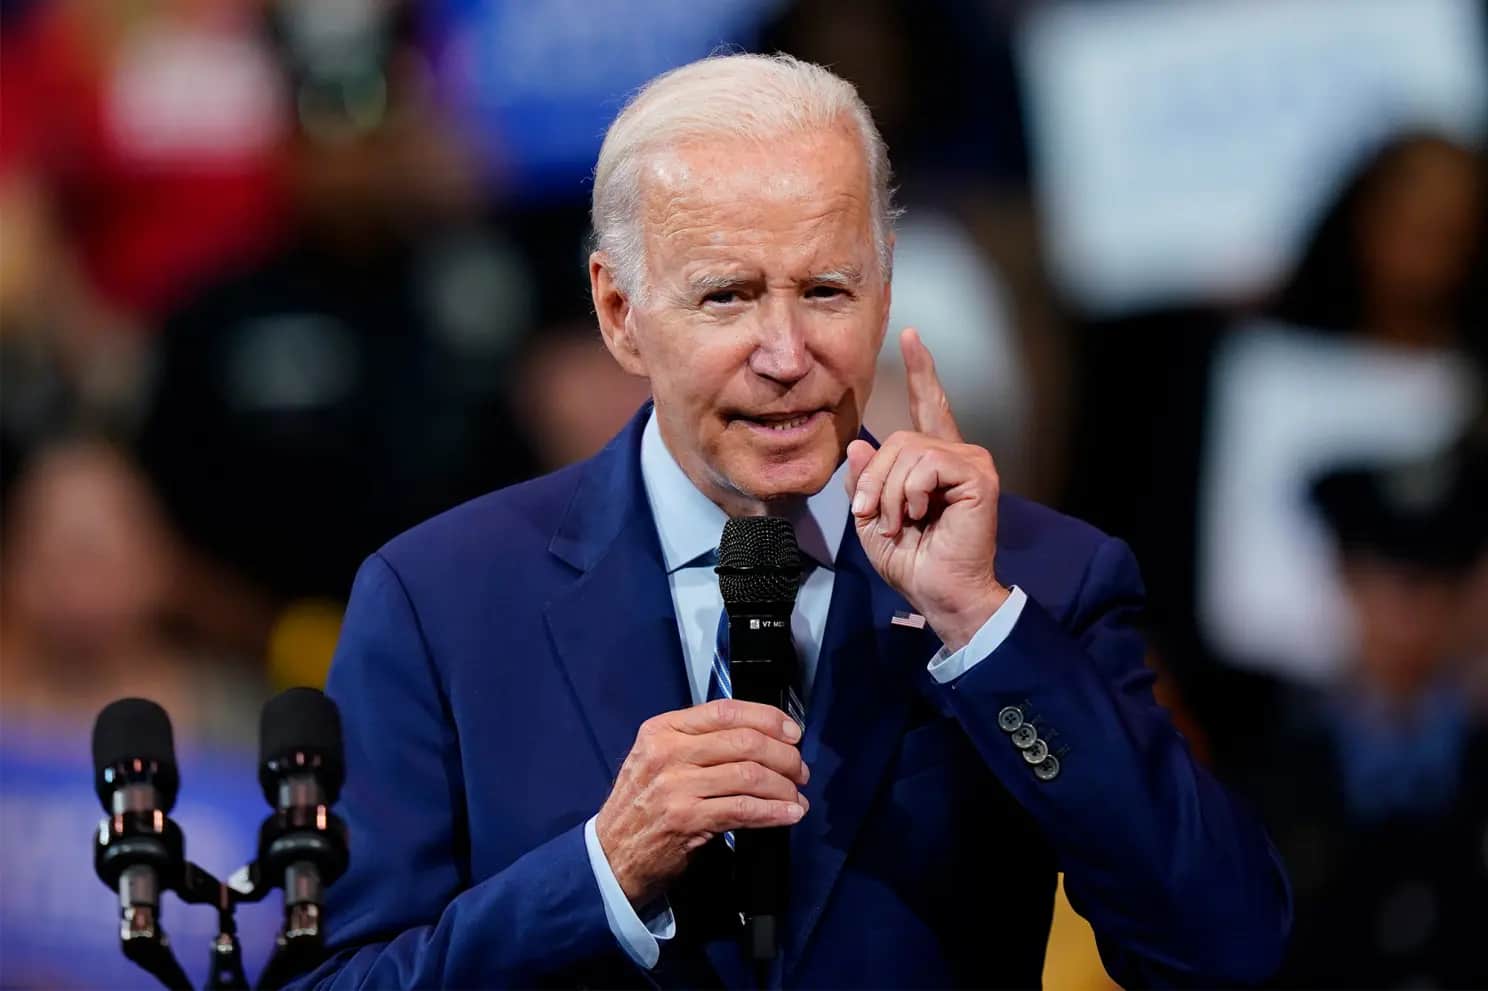 The Biden administration colluded with tech companies like Facebook and Twitter to censor "misinformation" on COVID-19, according to a petition field by Louisiana AG Jeff Landry and Missouri AG Eric Schmitt.